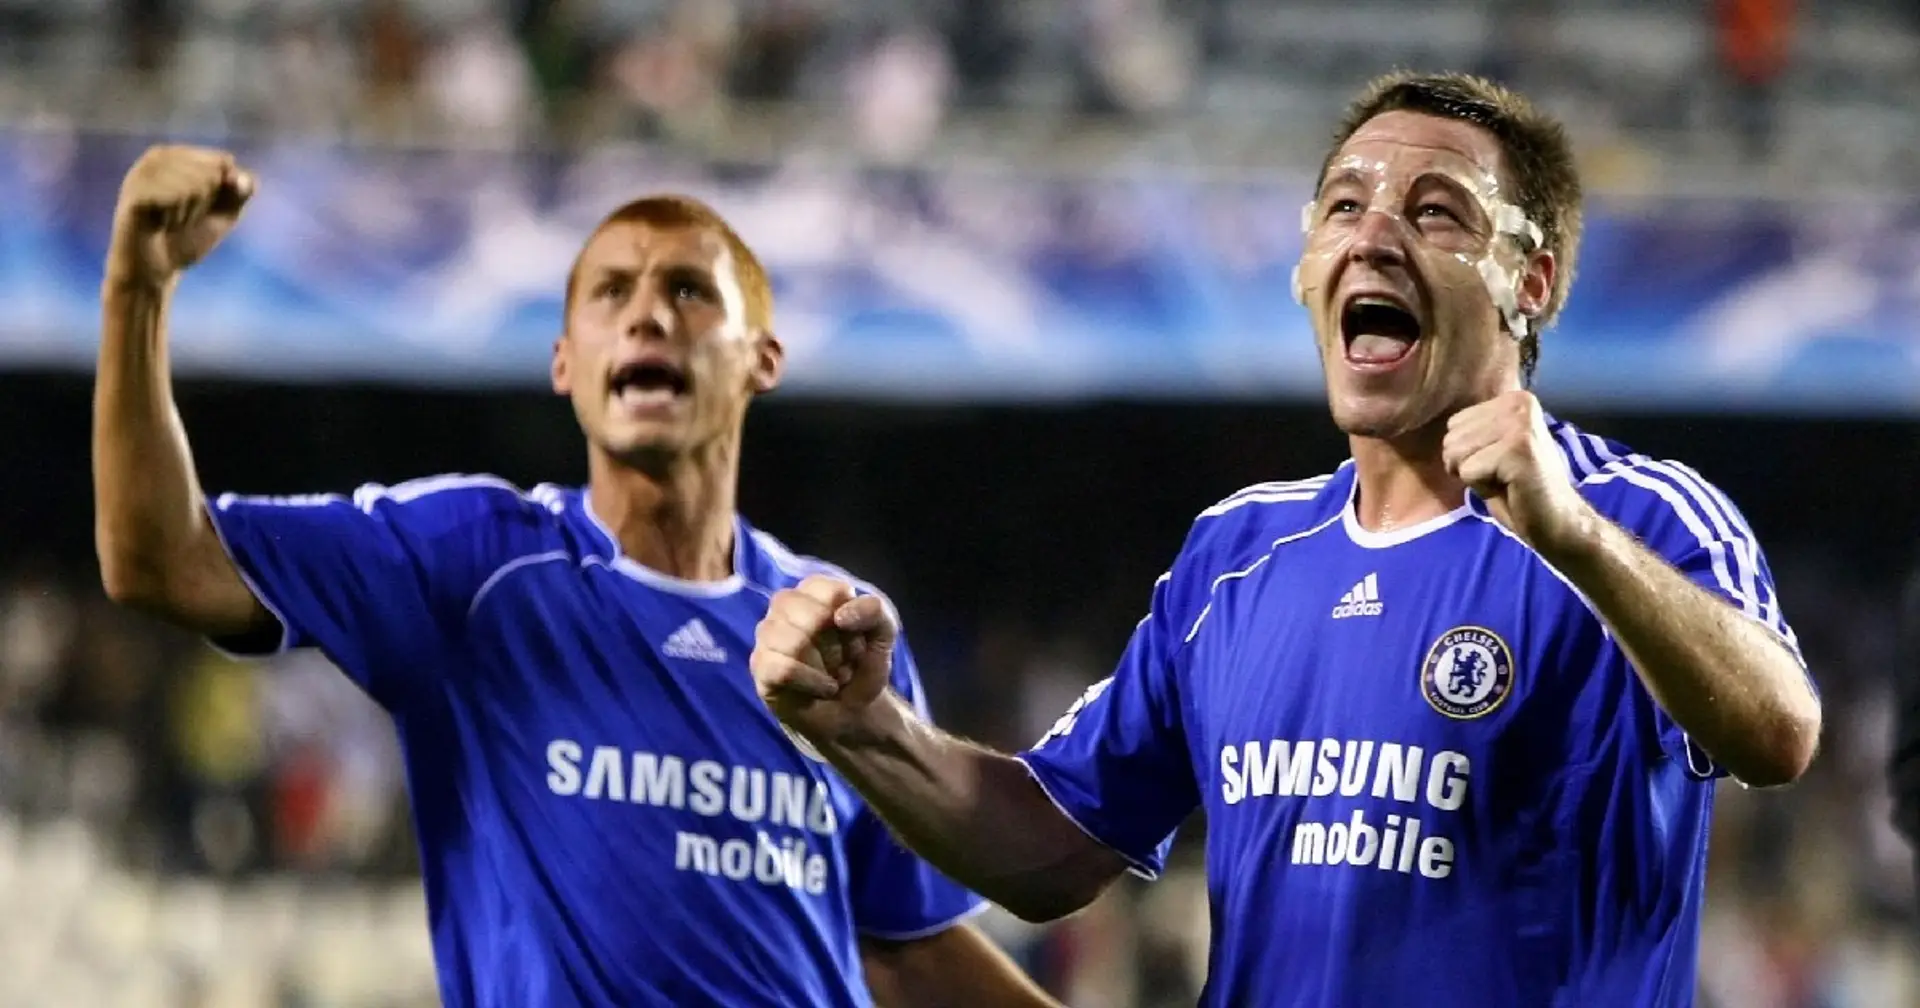 Steve Sidwell reveals how John Terry reacted after Mourinho sacking in 2007